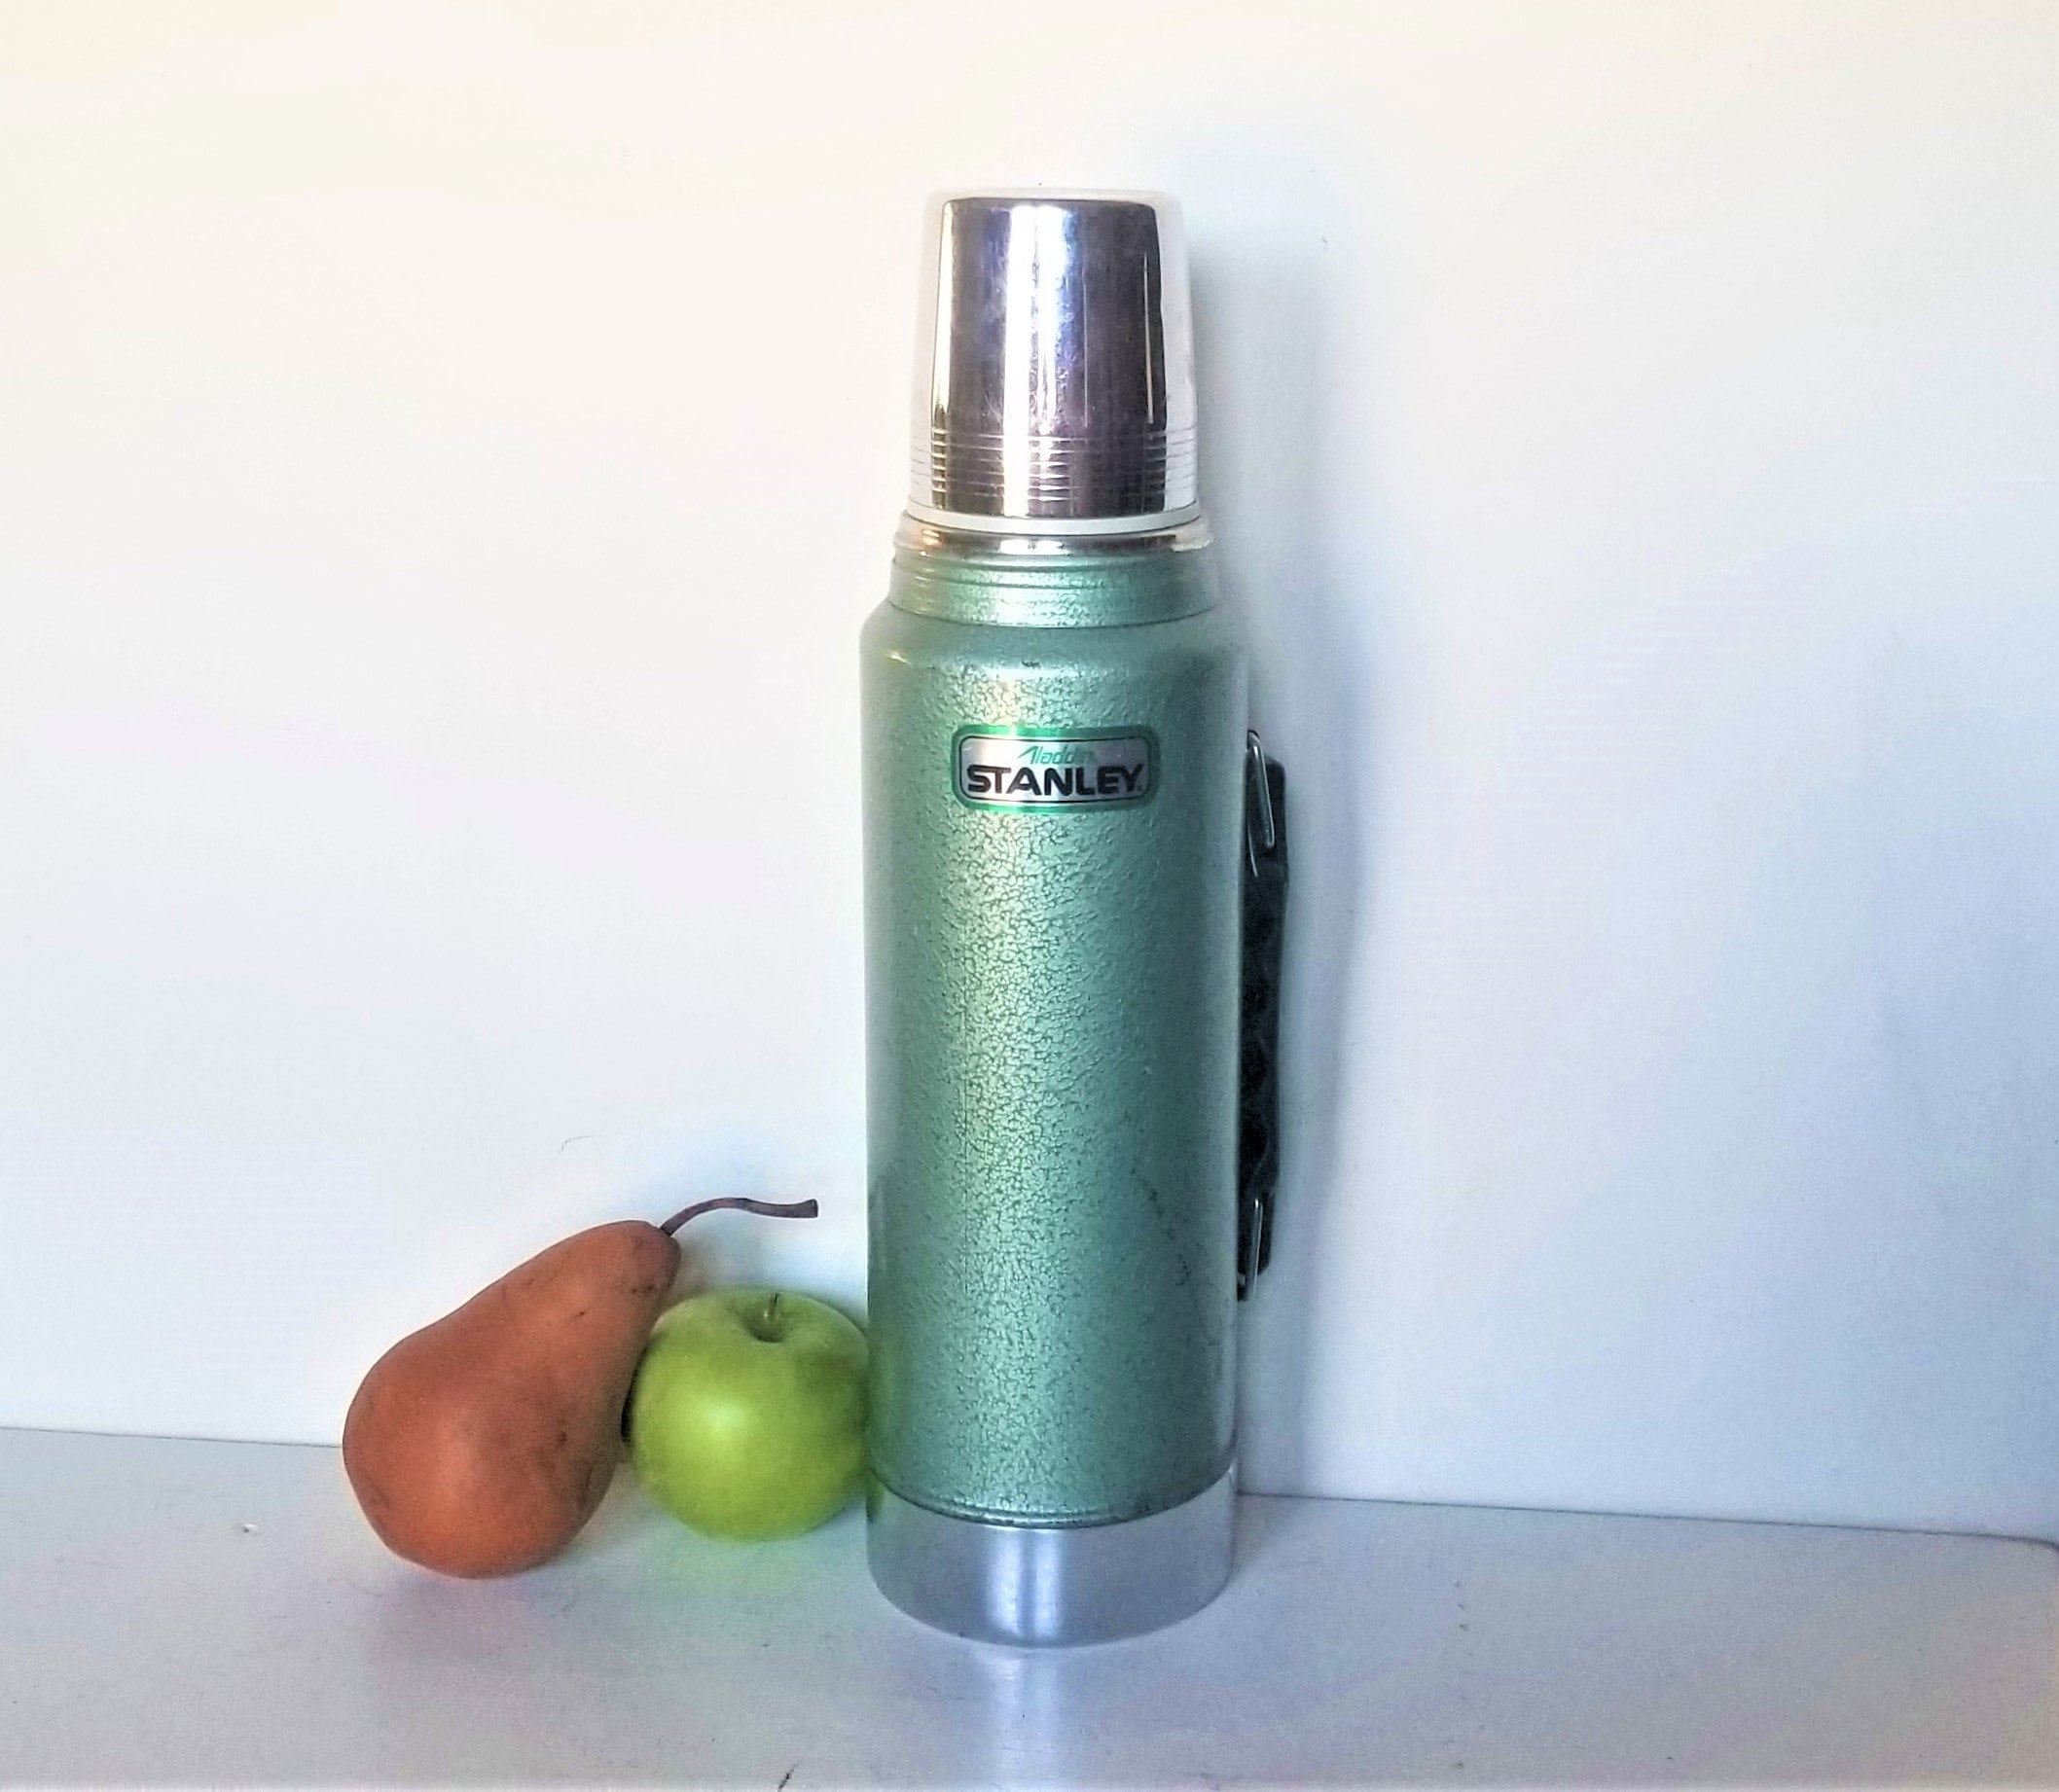 Vintage Stanley Aladdin Thermos, Metal Thermos, One Quart, Made in USA,  Glass Insulator, Rustic Distressed, 1970s 